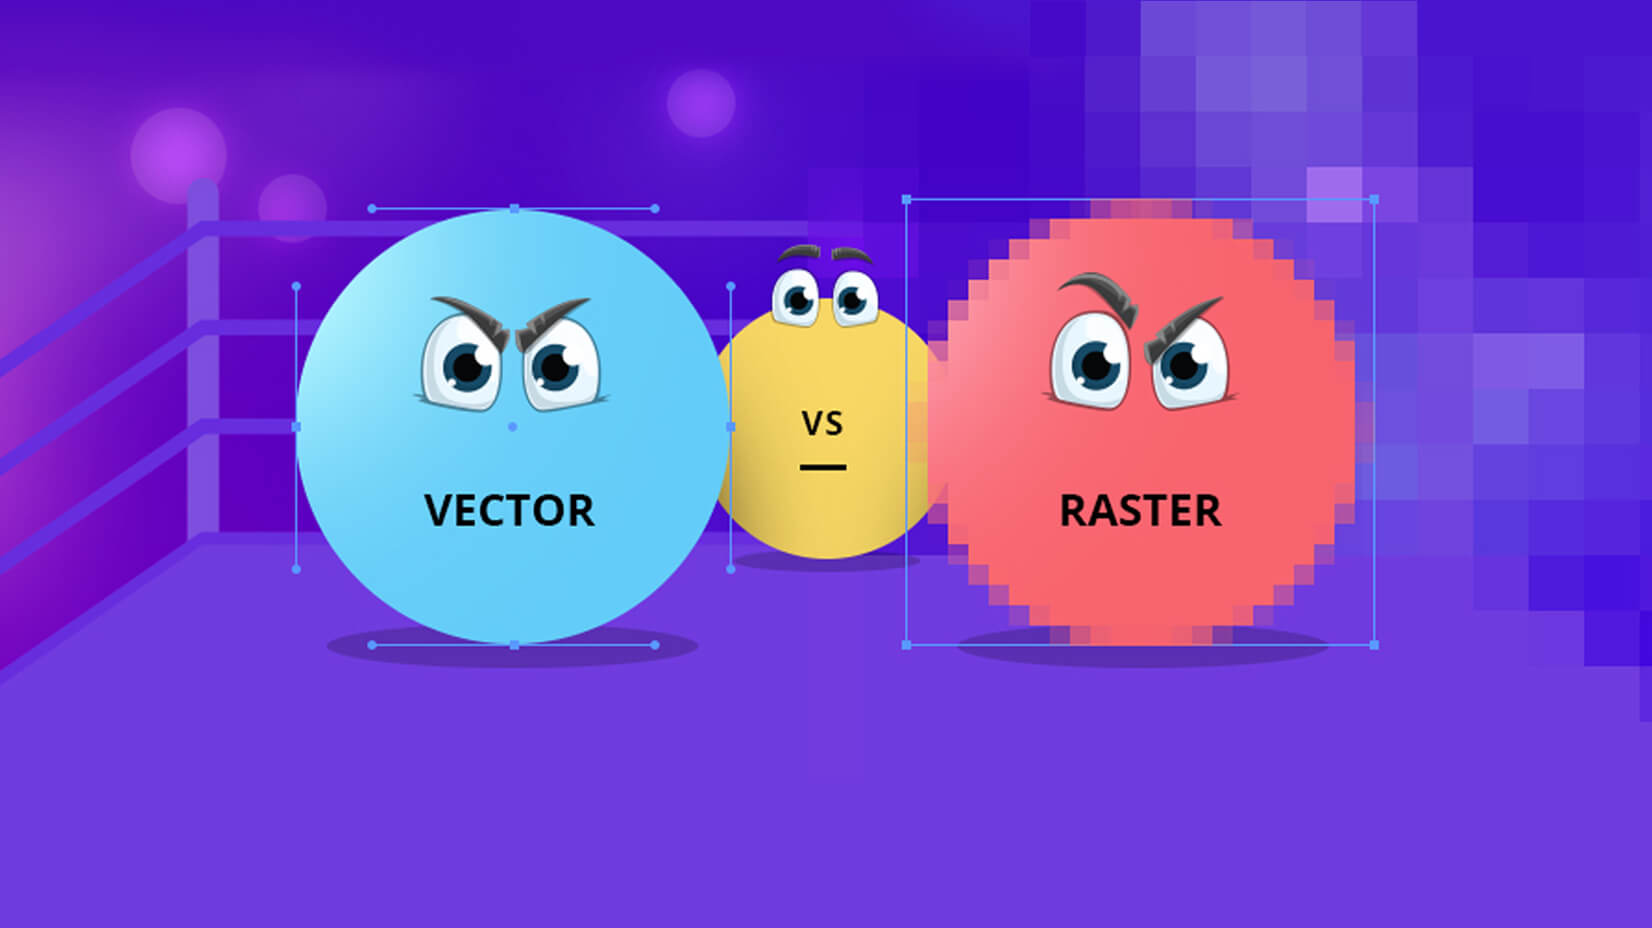 Vector and Raster